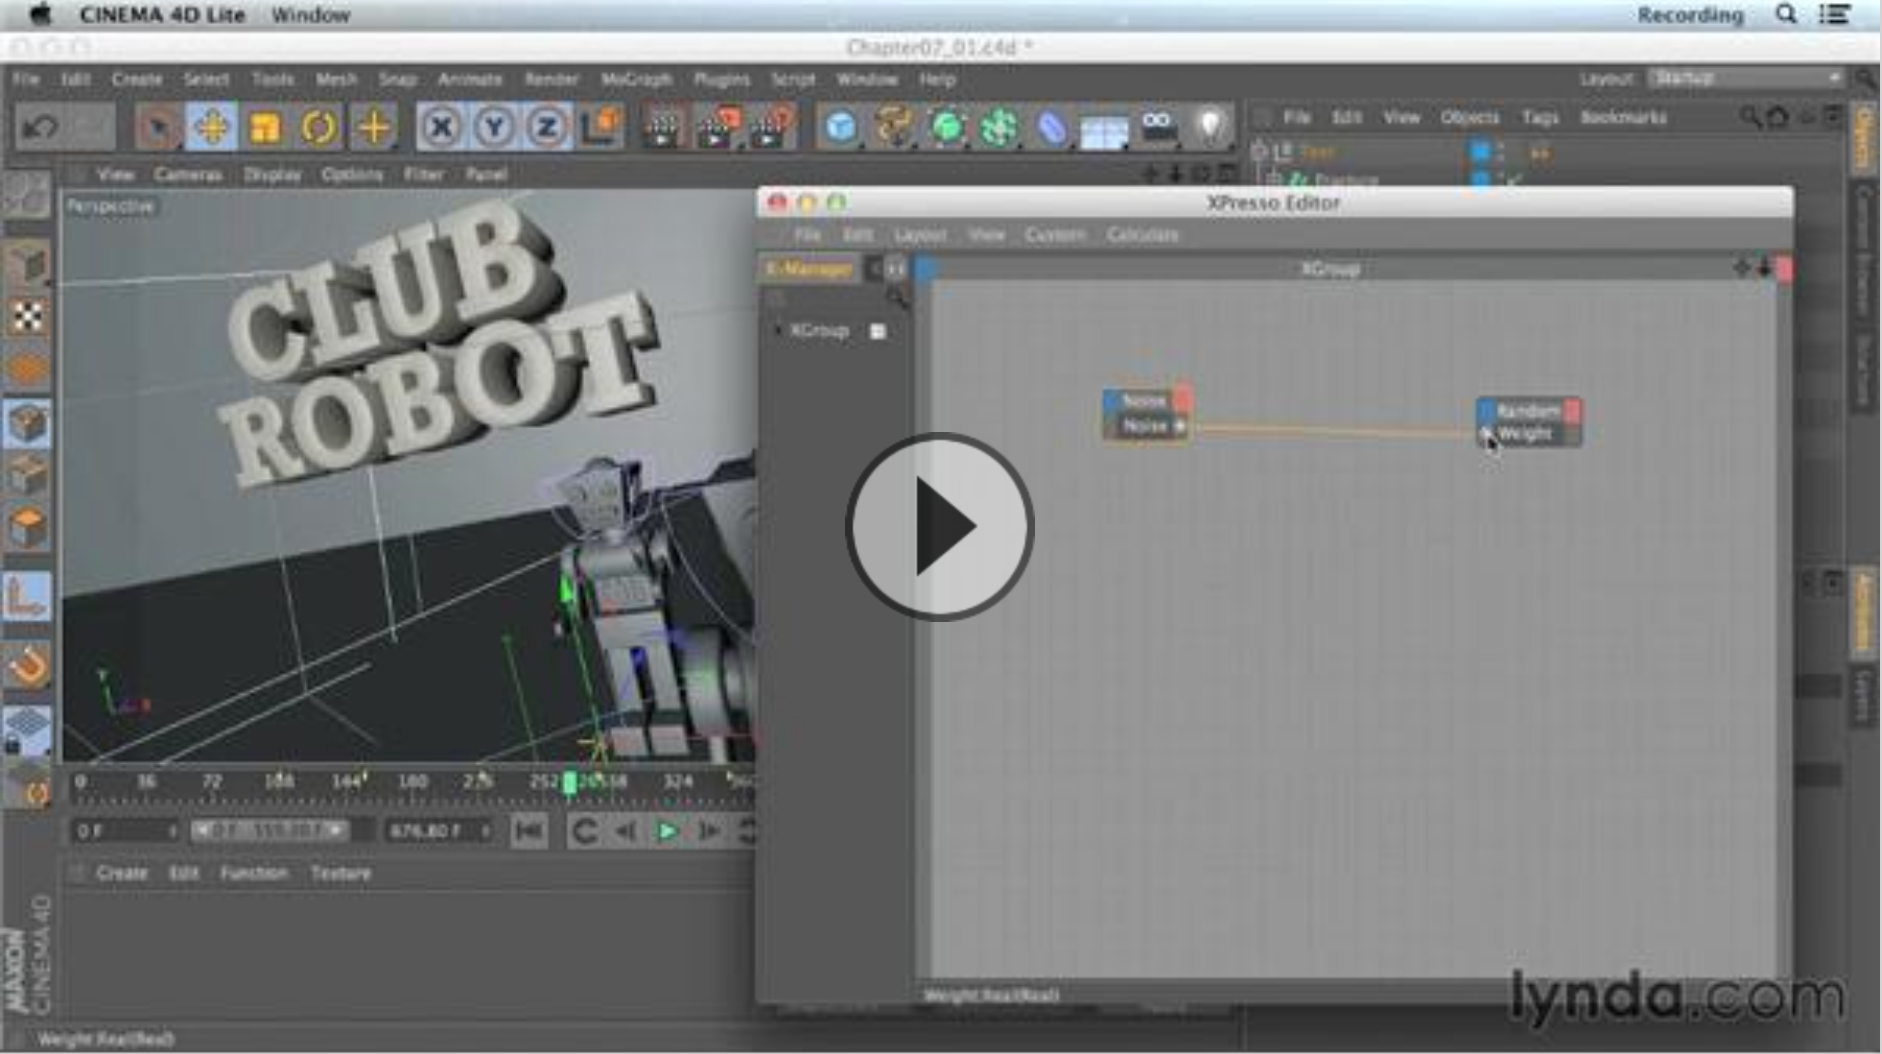 Creating a wiggle expression in CINEMA 4D Lite